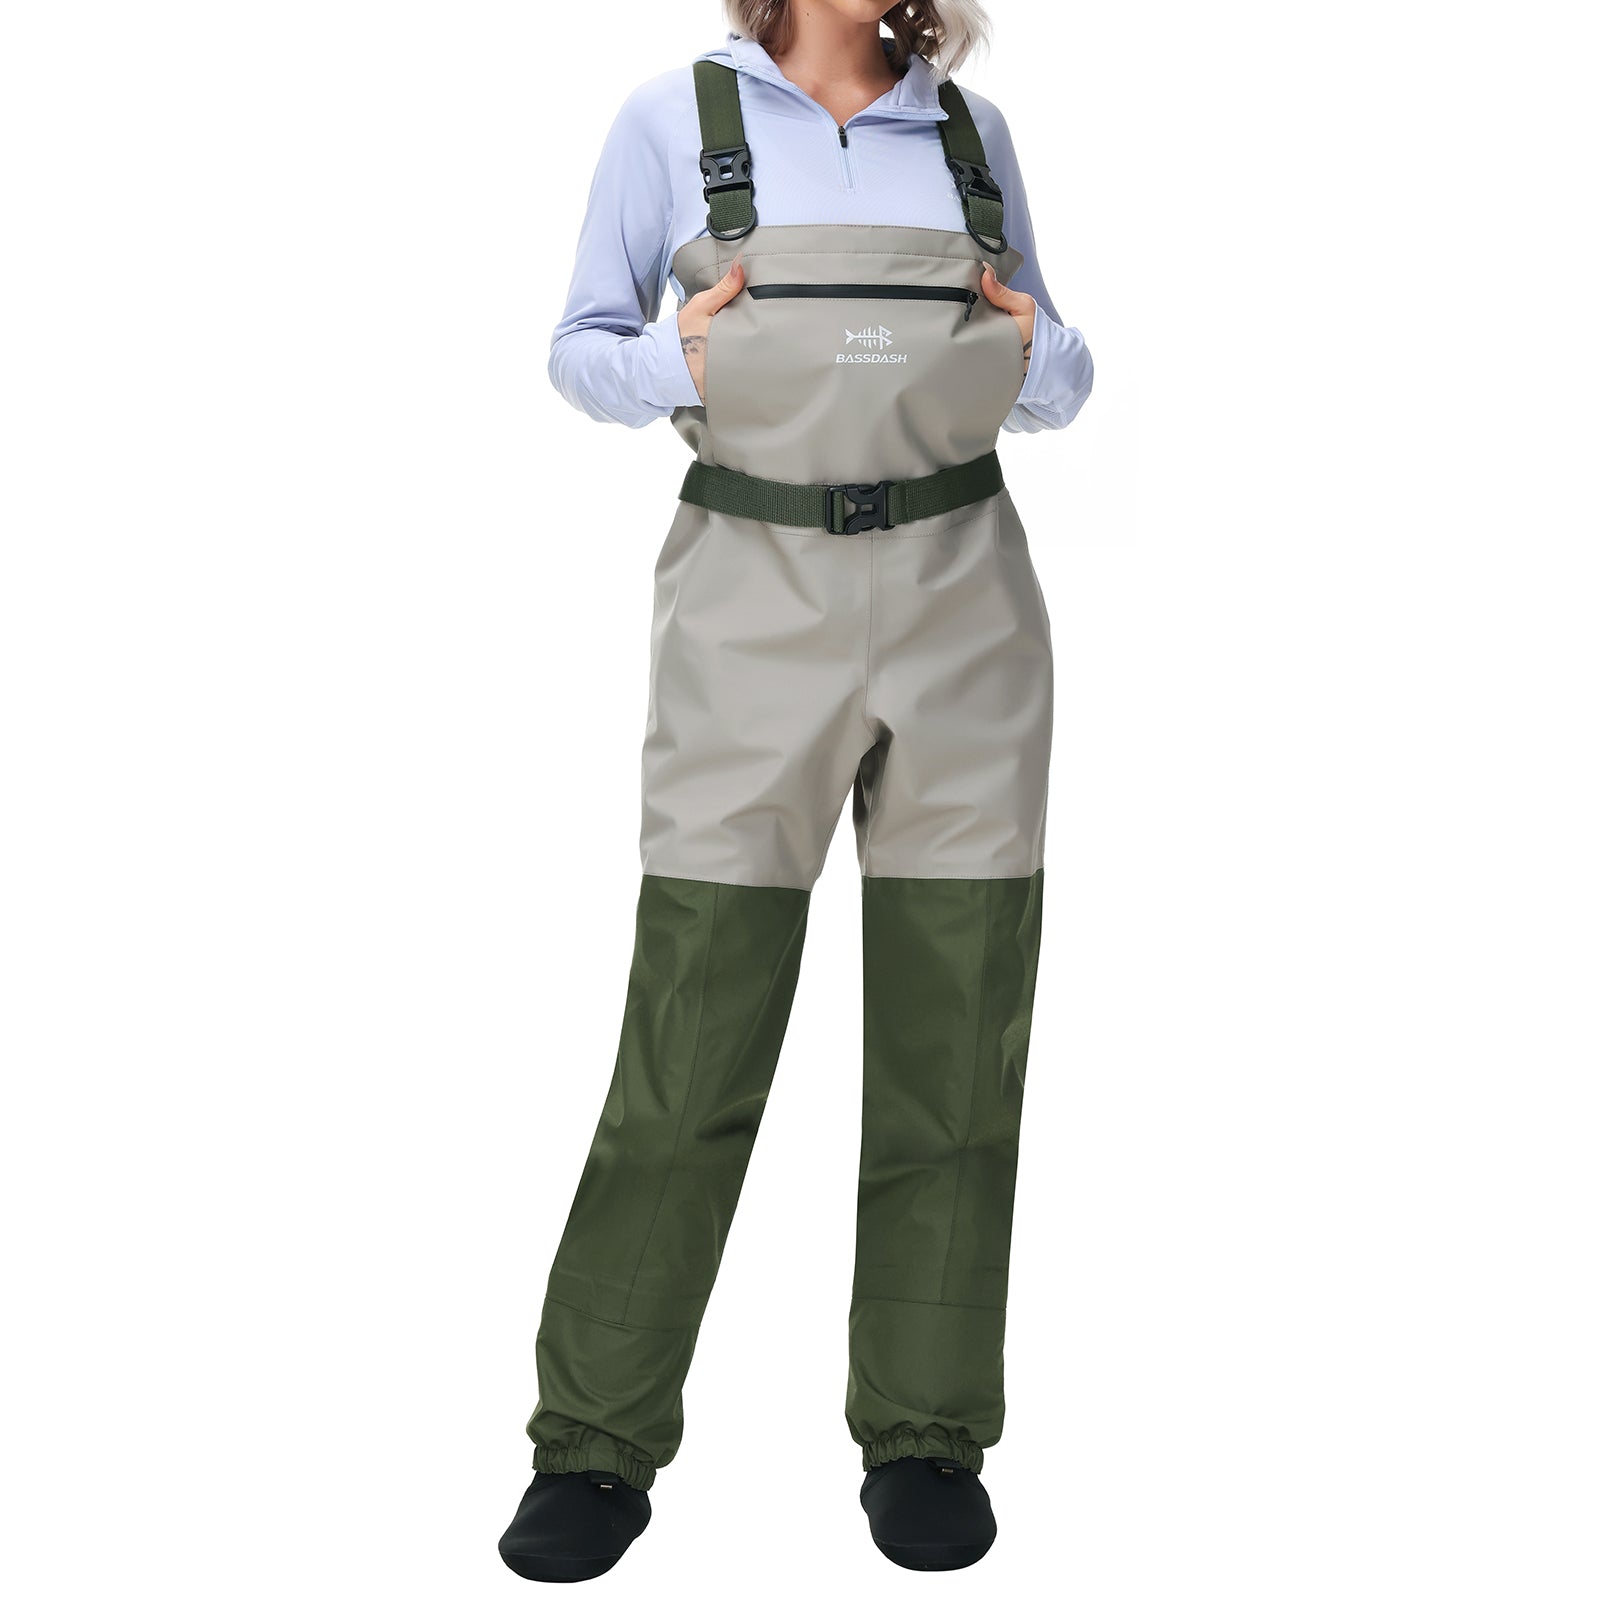 Bassdash IMMERSE Women’s Breathable Stocking Foot Fishing Waders Waterproof Lightweight Chest Wader, Light Tan/Green / Large 8-9